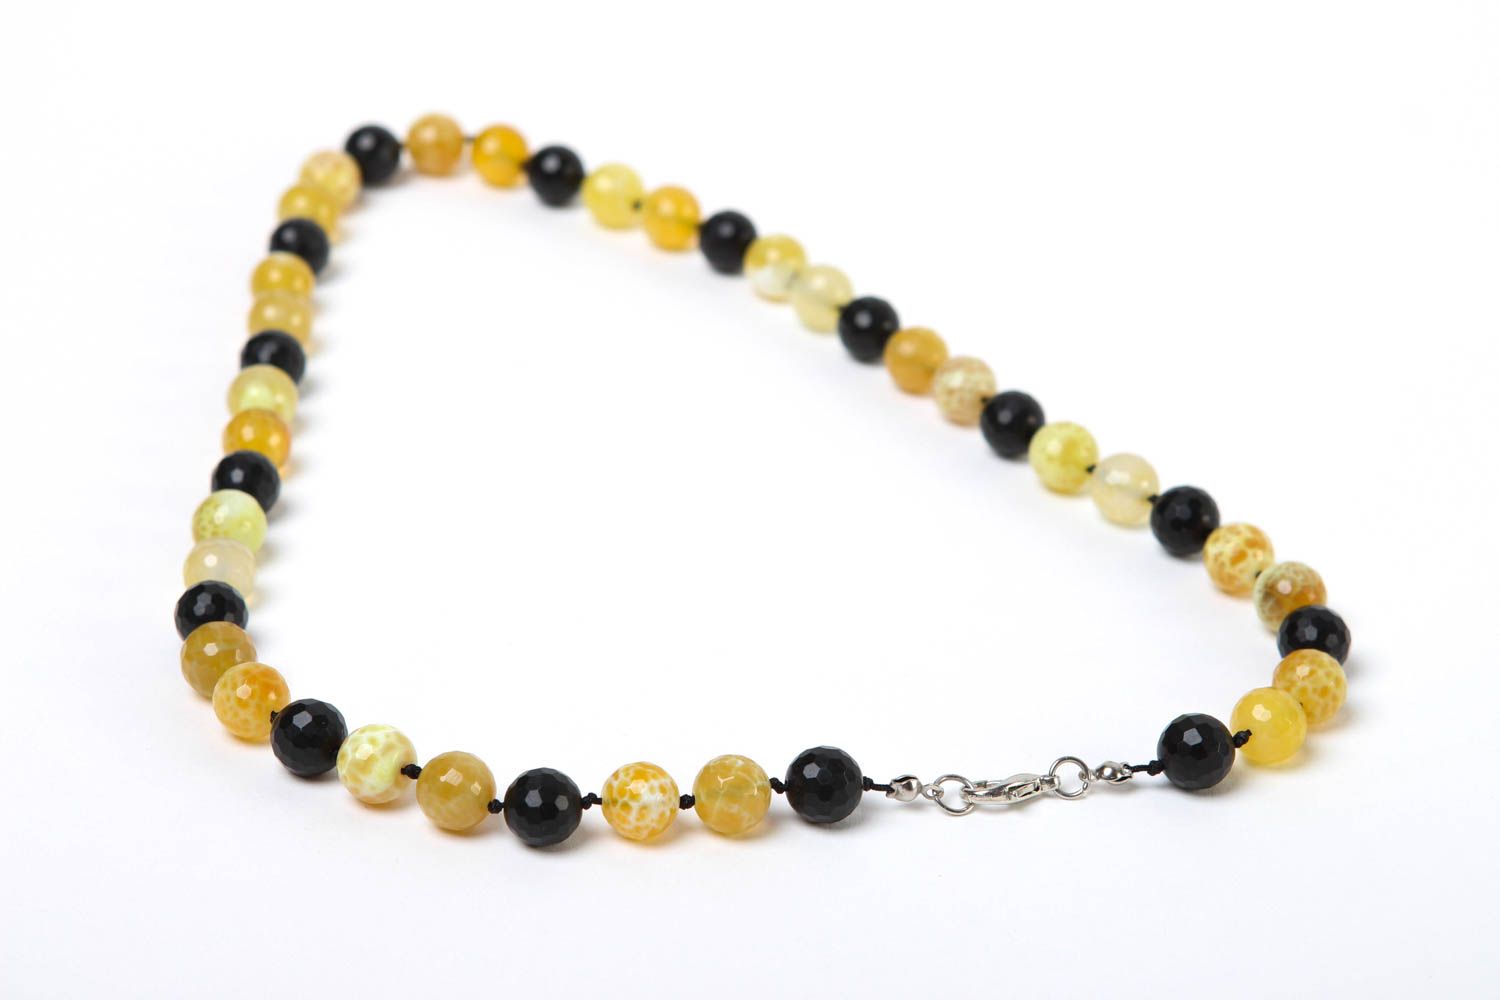 Bead necklace gemstone jewelry handmade necklace fashion accessories for women photo 4